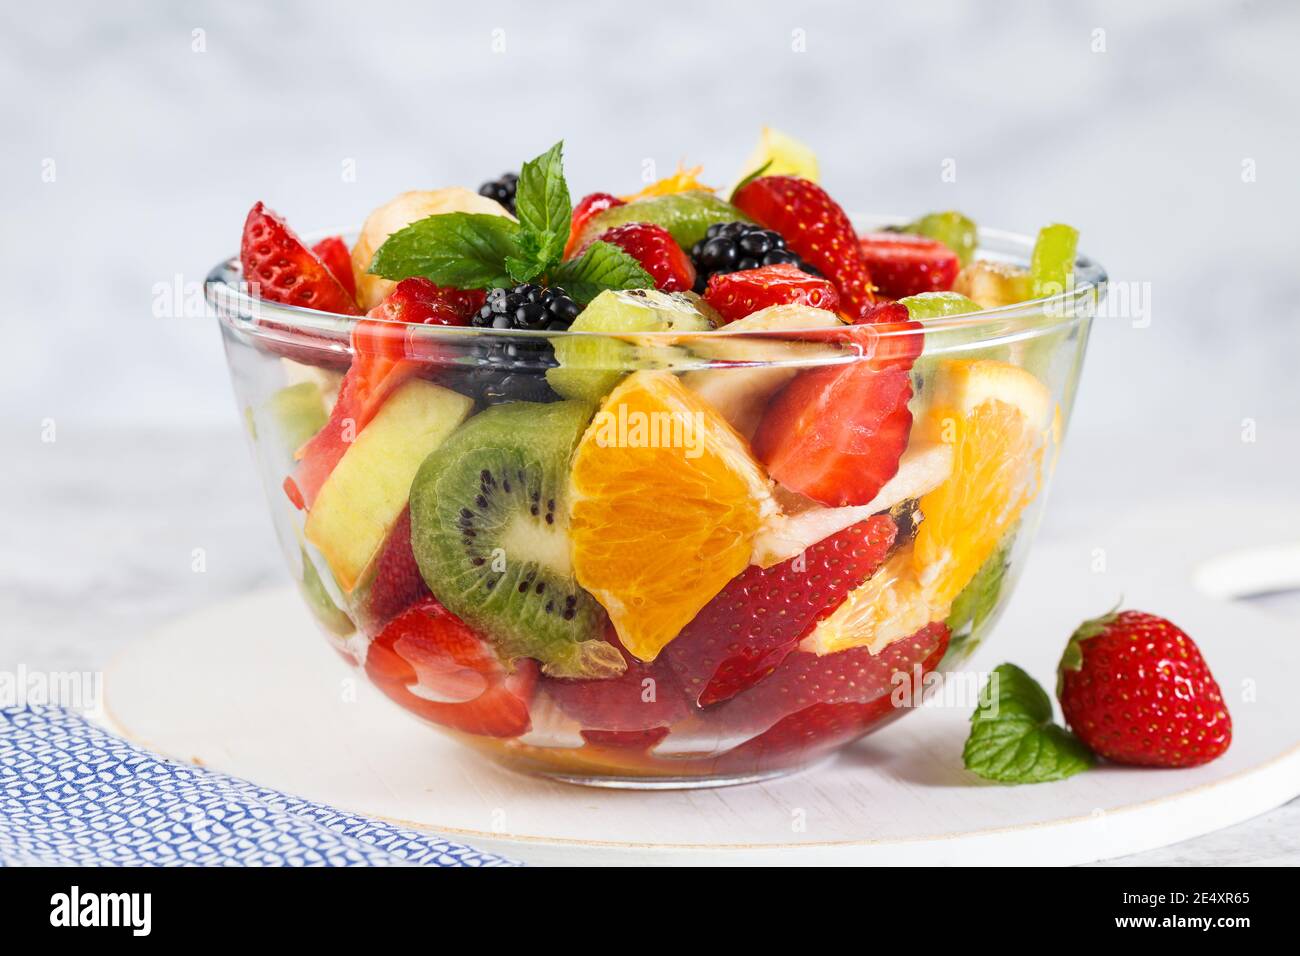 Healthy fresh fruit salad in a bowl on a gray background. Stock Photo